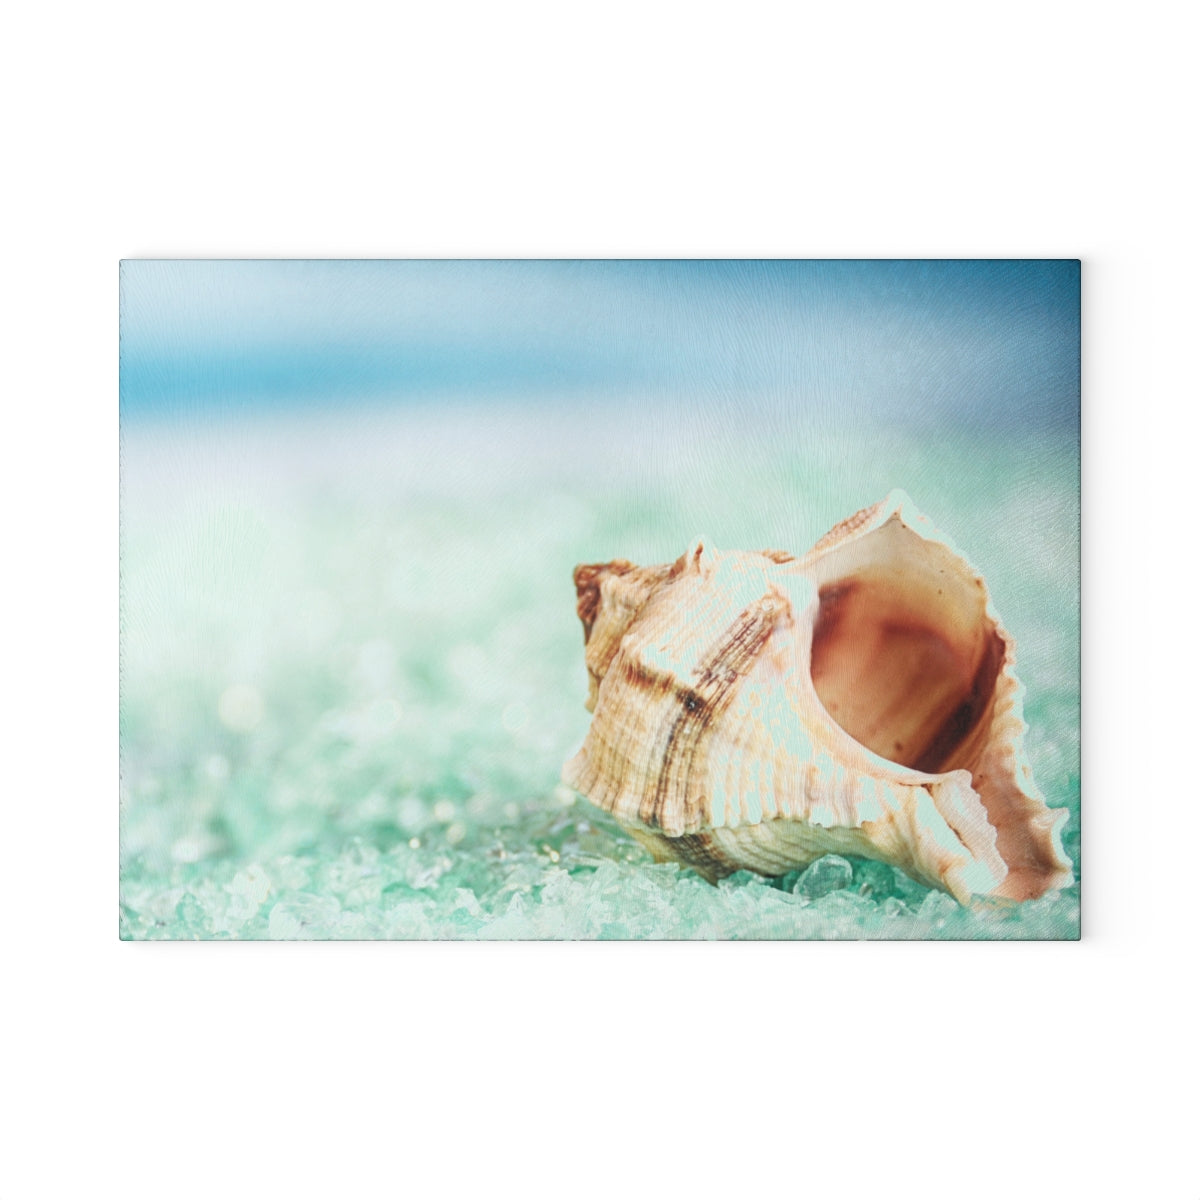 Glass Cutting Board, Shoreline Seashell - Two Sizes Available1